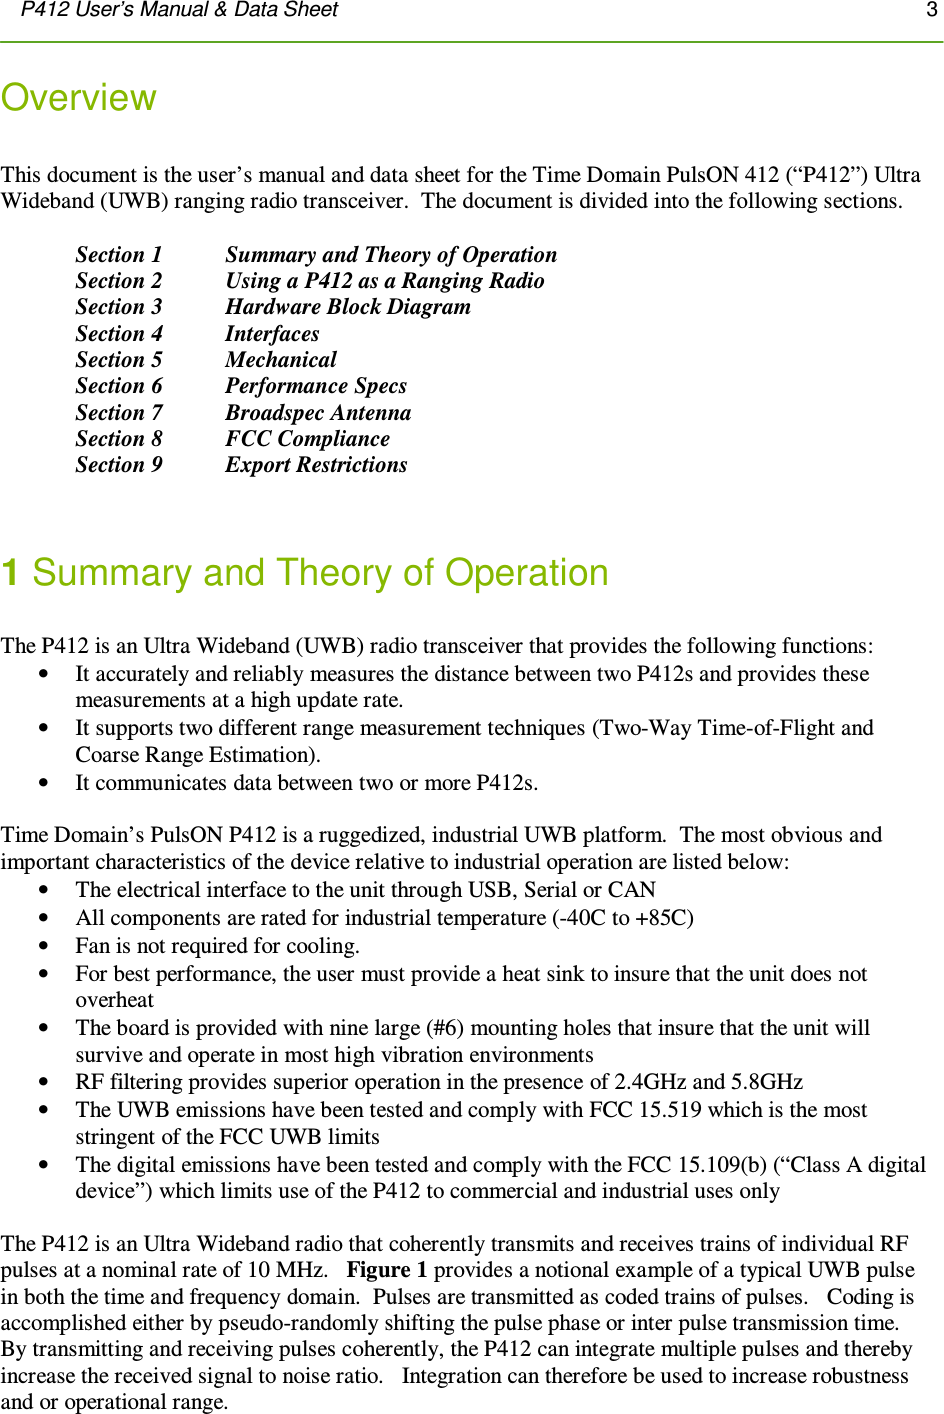 P412 User’s Manual &amp; Data Sheet       3      Overview   This document is the user’s manual and data sheet for the Time Domain PulsON 412 (“P412”) Ultra Wideband (UWB) ranging radio transceiver.  The document is divided into the following sections.    Section 1  Summary and Theory of Operation Section 2   Using a P412 as a Ranging Radio Section 3   Hardware Block Diagram Section 4   Interfaces   Section 5   Mechanical Section 6   Performance Specs Section 7   Broadspec Antenna Section 8   FCC Compliance Section 9  Export Restrictions   1 Summary and Theory of Operation  The P412 is an Ultra Wideband (UWB) radio transceiver that provides the following functions: • It accurately and reliably measures the distance between two P412s and provides these measurements at a high update rate. • It supports two different range measurement techniques (Two-Way Time-of-Flight and Coarse Range Estimation). • It communicates data between two or more P412s.  Time Domain’s PulsON P412 is a ruggedized, industrial UWB platform.  The most obvious and important characteristics of the device relative to industrial operation are listed below: • The electrical interface to the unit through USB, Serial or CAN • All components are rated for industrial temperature (-40C to +85C) • Fan is not required for cooling.   • For best performance, the user must provide a heat sink to insure that the unit does not overheat • The board is provided with nine large (#6) mounting holes that insure that the unit will survive and operate in most high vibration environments • RF filtering provides superior operation in the presence of 2.4GHz and 5.8GHz  • The UWB emissions have been tested and comply with FCC 15.519 which is the most stringent of the FCC UWB limits • The digital emissions have been tested and comply with the FCC 15.109(b) (“Class A digital device”) which limits use of the P412 to commercial and industrial uses only  The P412 is an Ultra Wideband radio that coherently transmits and receives trains of individual RF pulses at a nominal rate of 10 MHz.   Figure 1 provides a notional example of a typical UWB pulse in both the time and frequency domain.  Pulses are transmitted as coded trains of pulses.   Coding is accomplished either by pseudo-randomly shifting the pulse phase or inter pulse transmission time.  By transmitting and receiving pulses coherently, the P412 can integrate multiple pulses and thereby increase the received signal to noise ratio.   Integration can therefore be used to increase robustness and or operational range. 